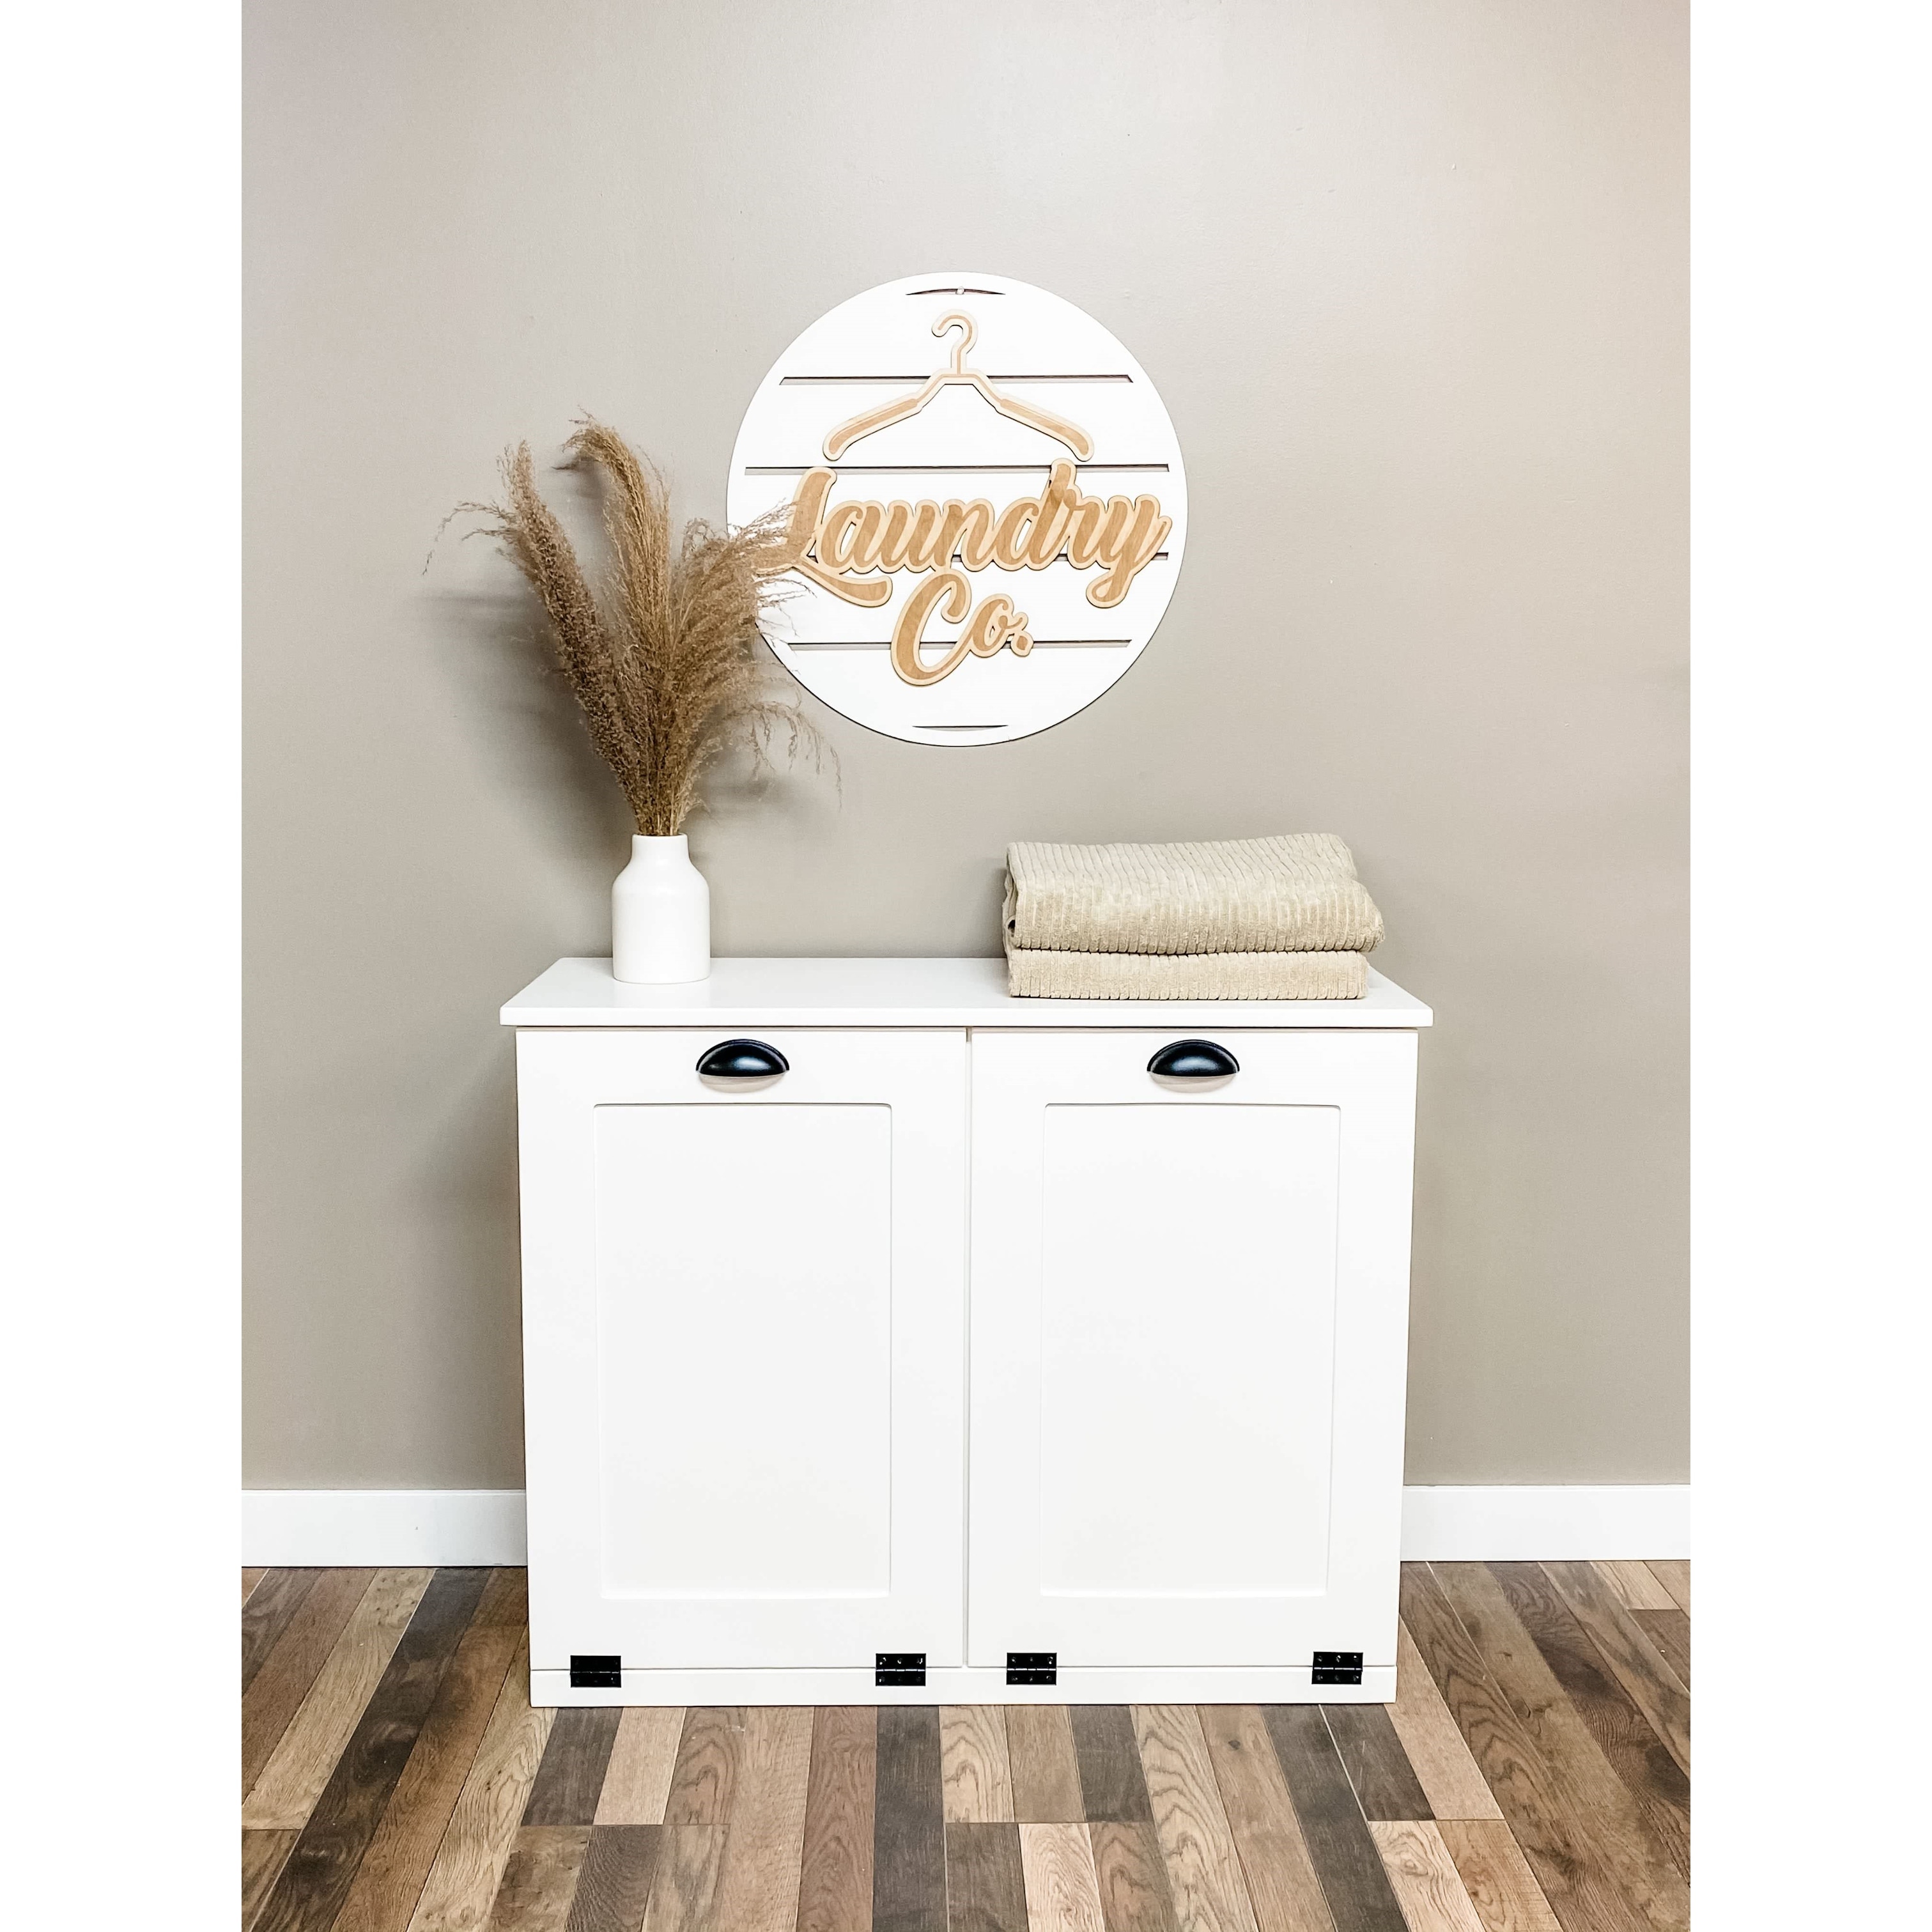 https://ak1.ostkcdn.com/images/products/is/images/direct/62ddcaa9871915a9f583866606637c03163e5486/Double-Tilt-out-Laundry-Hamper-Cabinet.jpg